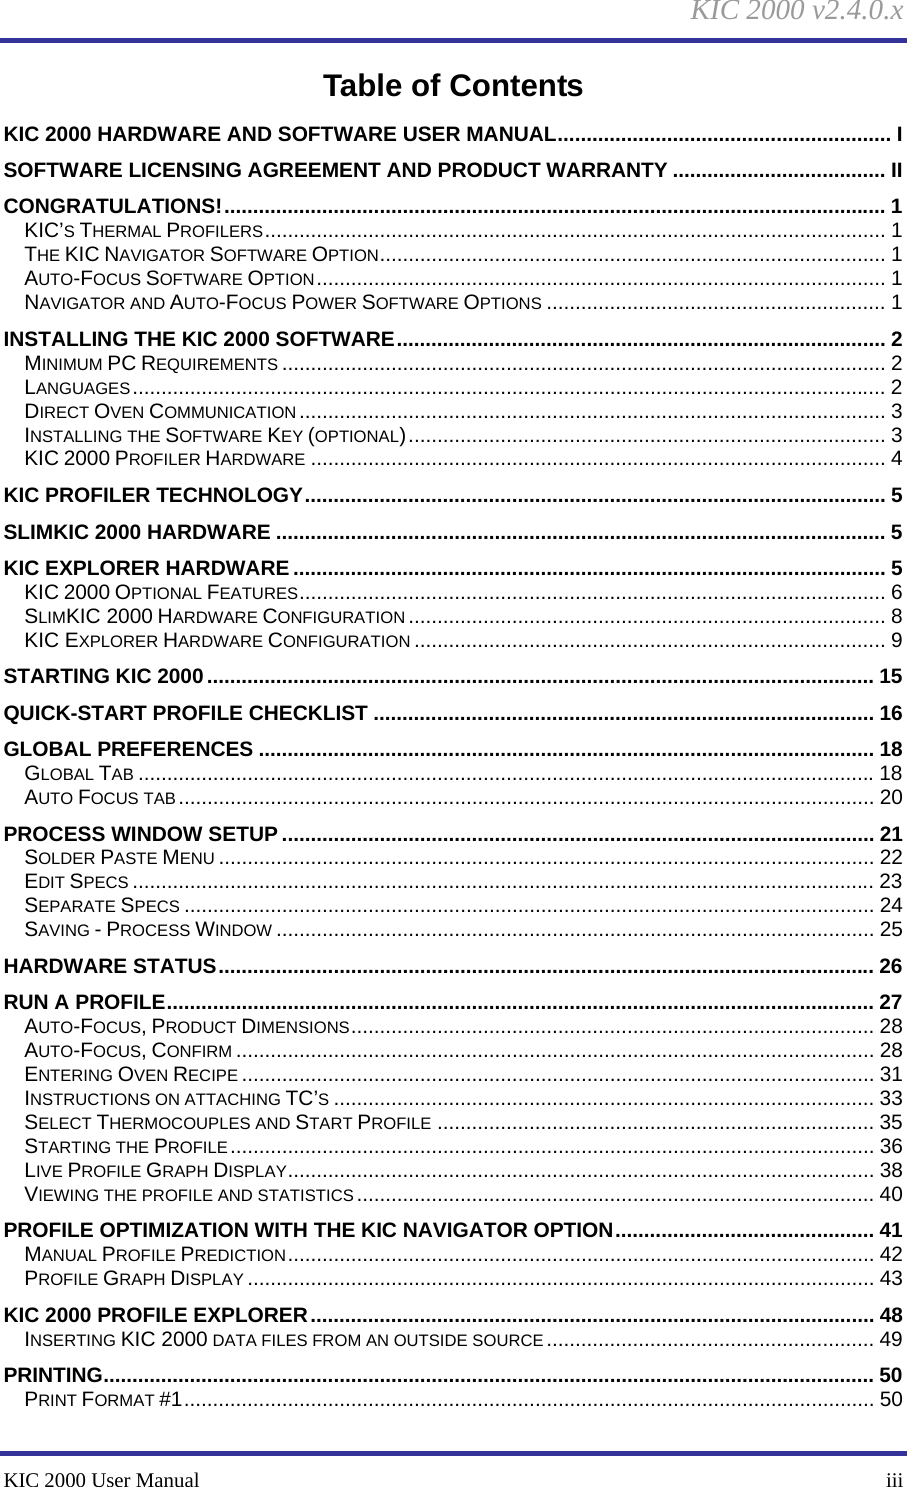 KIC 2000 v2.4.0.x KIC 2000 User Manual    iii Table of Contents KIC 2000 HARDWARE AND SOFTWARE USER MANUAL.......................................................... I SOFTWARE LICENSING AGREEMENT AND PRODUCT WARRANTY ..................................... II CONGRATULATIONS!................................................................................................................... 1 KIC’S THERMAL PROFILERS............................................................................................................ 1 THE KIC NAVIGATOR SOFTWARE OPTION........................................................................................ 1 AUTO-FOCUS SOFTWARE OPTION................................................................................................... 1 NAVIGATOR AND AUTO-FOCUS POWER SOFTWARE OPTIONS ........................................................... 1 INSTALLING THE KIC 2000 SOFTWARE..................................................................................... 2 MINIMUM PC REQUIREMENTS ......................................................................................................... 2 LANGUAGES................................................................................................................................... 2 DIRECT OVEN COMMUNICATION ...................................................................................................... 3 INSTALLING THE SOFTWARE KEY (OPTIONAL)................................................................................... 3 KIC 2000 PROFILER HARDWARE .................................................................................................... 4 KIC PROFILER TECHNOLOGY..................................................................................................... 5 SLIMKIC 2000 HARDWARE .......................................................................................................... 5 KIC EXPLORER HARDWARE ....................................................................................................... 5 KIC 2000 OPTIONAL FEATURES...................................................................................................... 6 SLIMKIC 2000 HARDWARE CONFIGURATION ................................................................................... 8 KIC EXPLORER HARDWARE CONFIGURATION .................................................................................. 9 STARTING KIC 2000.................................................................................................................... 15 QUICK-START PROFILE CHECKLIST ....................................................................................... 16 GLOBAL PREFERENCES ........................................................................................................... 18 GLOBAL TAB ................................................................................................................................18 AUTO FOCUS TAB ......................................................................................................................... 20 PROCESS WINDOW SETUP ....................................................................................................... 21 SOLDER PASTE MENU .................................................................................................................. 22 EDIT SPECS ................................................................................................................................. 23 SEPARATE SPECS ........................................................................................................................ 24 SAVING - PROCESS WINDOW ........................................................................................................ 25 HARDWARE STATUS.................................................................................................................. 26 RUN A PROFILE........................................................................................................................... 27 AUTO-FOCUS, PRODUCT DIMENSIONS........................................................................................... 28 AUTO-FOCUS, CONFIRM ............................................................................................................... 28 ENTERING OVEN RECIPE .............................................................................................................. 31 INSTRUCTIONS ON ATTACHING TC’S.............................................................................................. 33 SELECT THERMOCOUPLES AND START PROFILE ............................................................................ 35 STARTING THE PROFILE................................................................................................................ 36 LIVE PROFILE GRAPH DISPLAY...................................................................................................... 38 VIEWING THE PROFILE AND STATISTICS .......................................................................................... 40 PROFILE OPTIMIZATION WITH THE KIC NAVIGATOR OPTION............................................. 41 MANUAL PROFILE PREDICTION...................................................................................................... 42 PROFILE GRAPH DISPLAY ............................................................................................................. 43 KIC 2000 PROFILE EXPLORER.................................................................................................. 48 INSERTING KIC 2000 DATA FILES FROM AN OUTSIDE SOURCE......................................................... 49 PRINTING...................................................................................................................................... 50 PRINT FORMAT #1........................................................................................................................ 50 